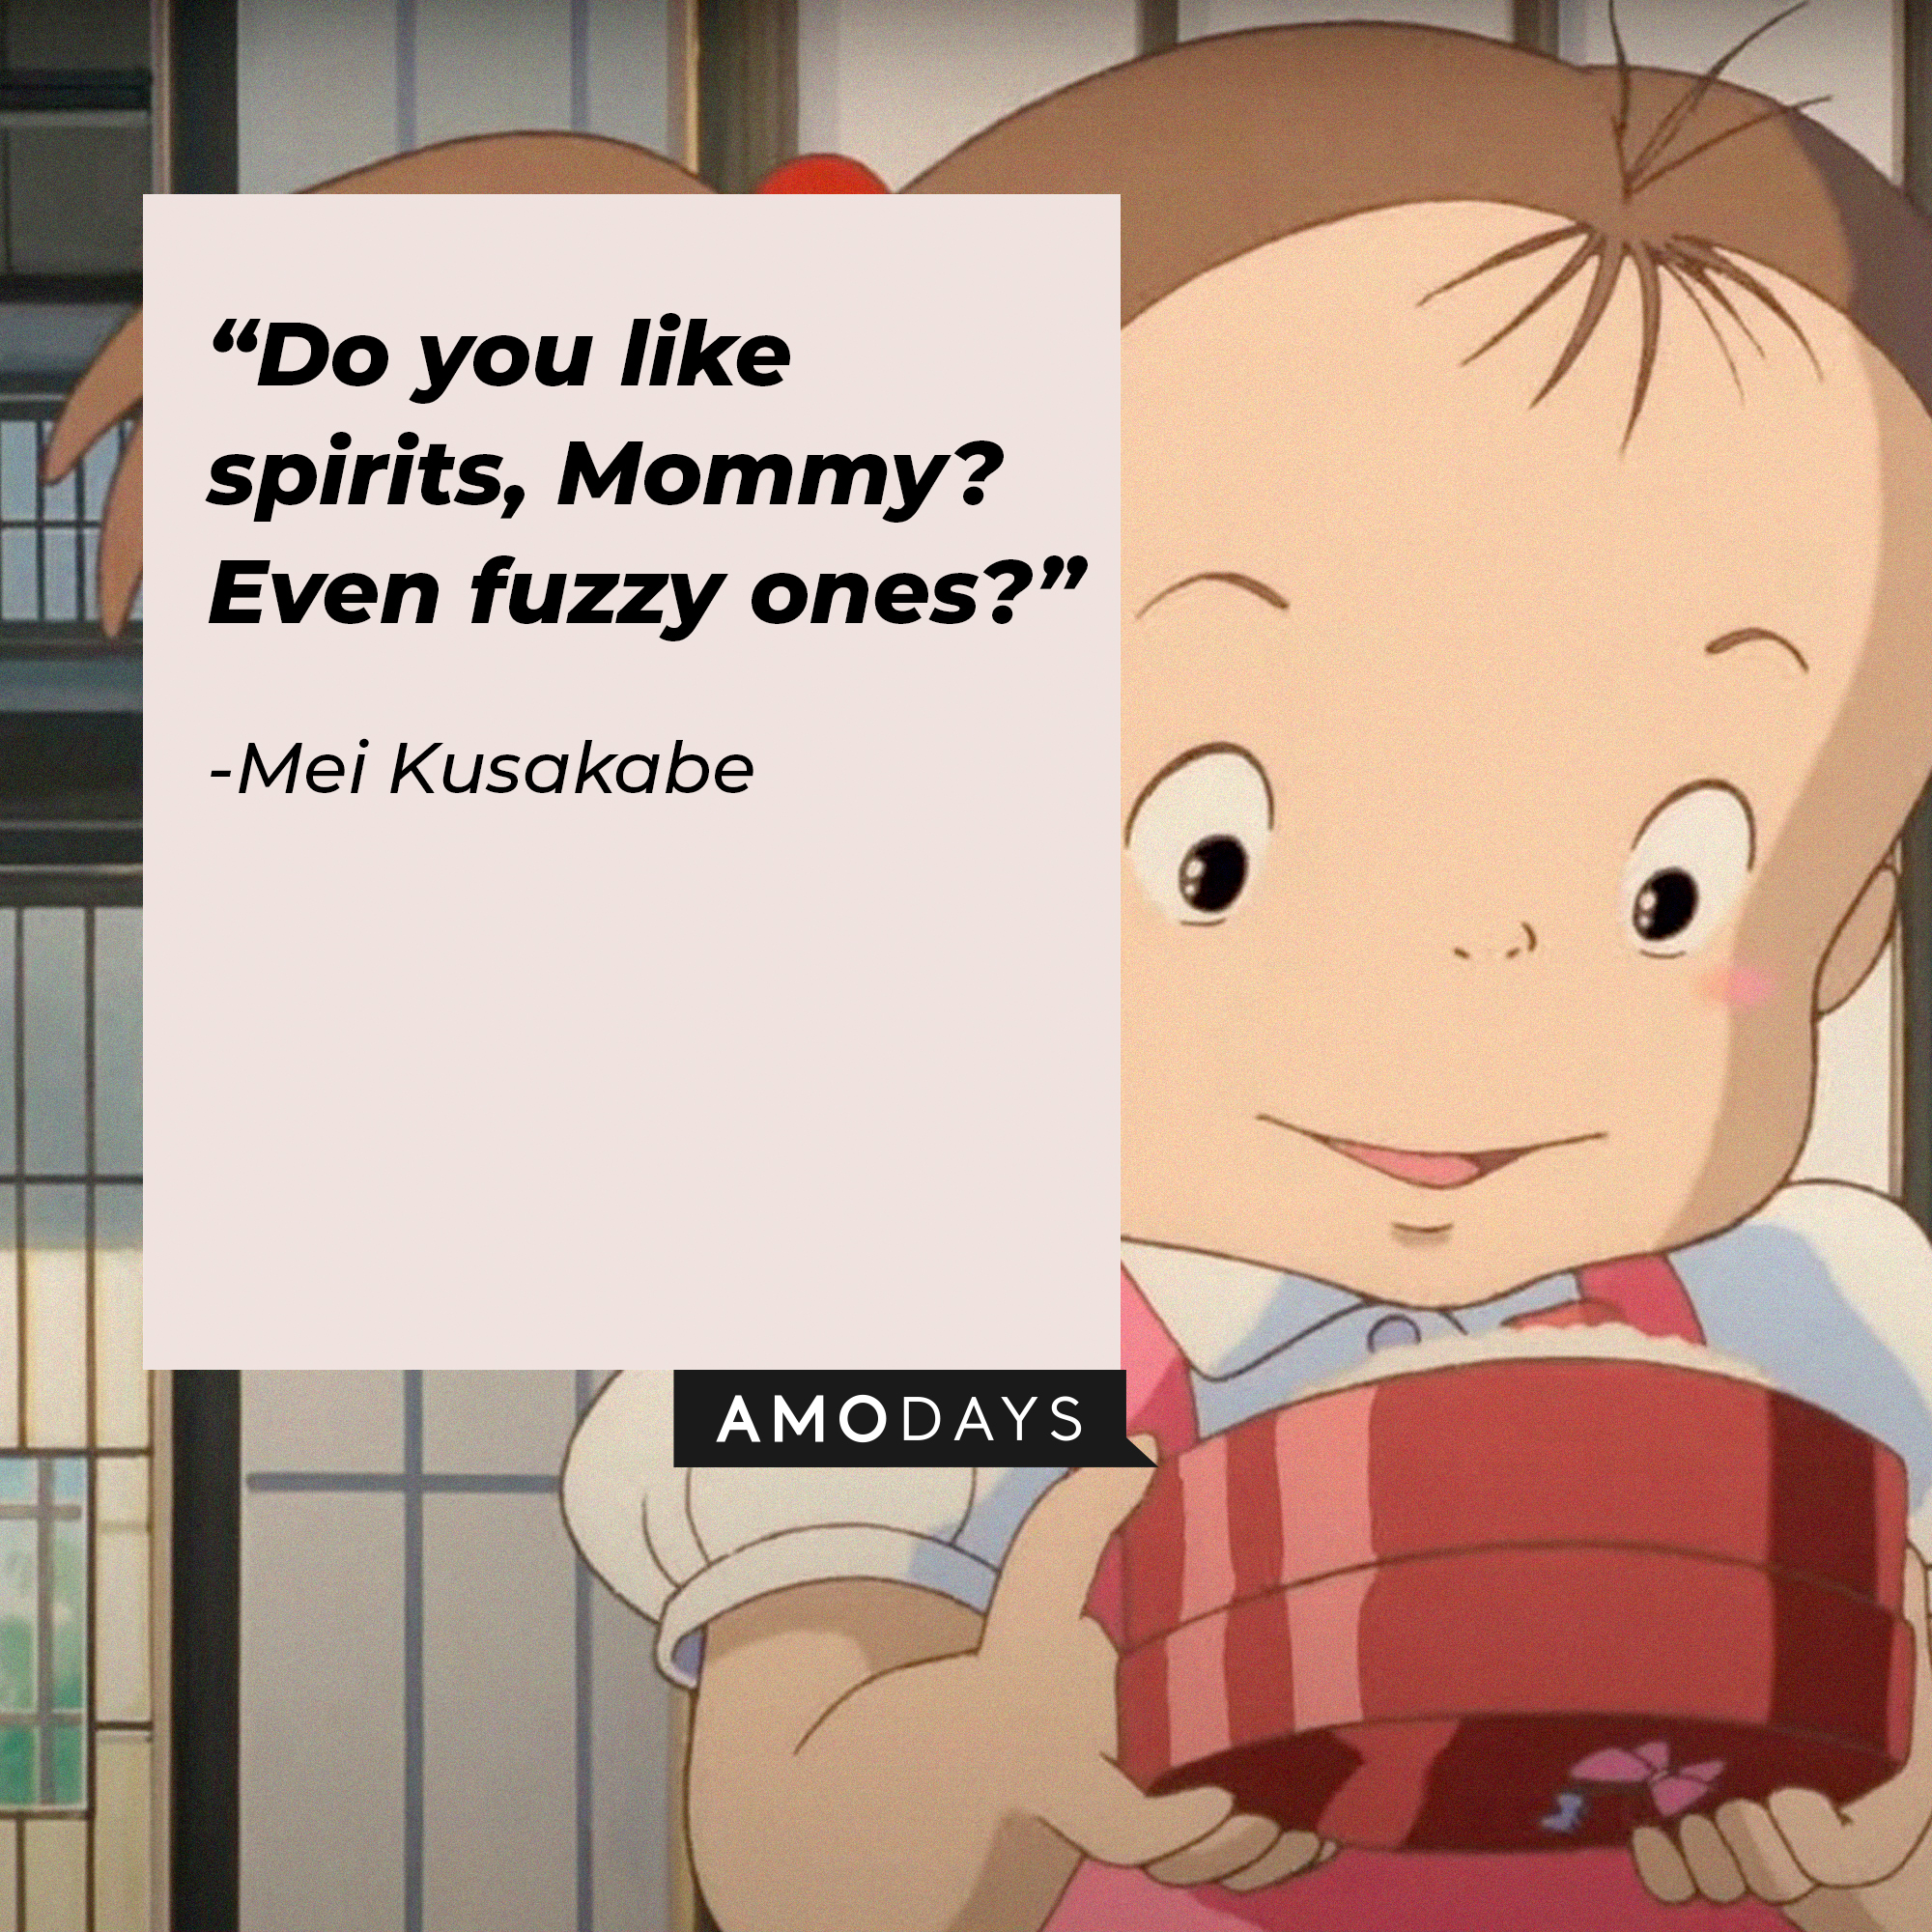 An image of Mei Kusakabe with her quote: “Do you like spirits, Mommy? Even fuzzy ones?” | Source: facebook.com/GhibliUSA